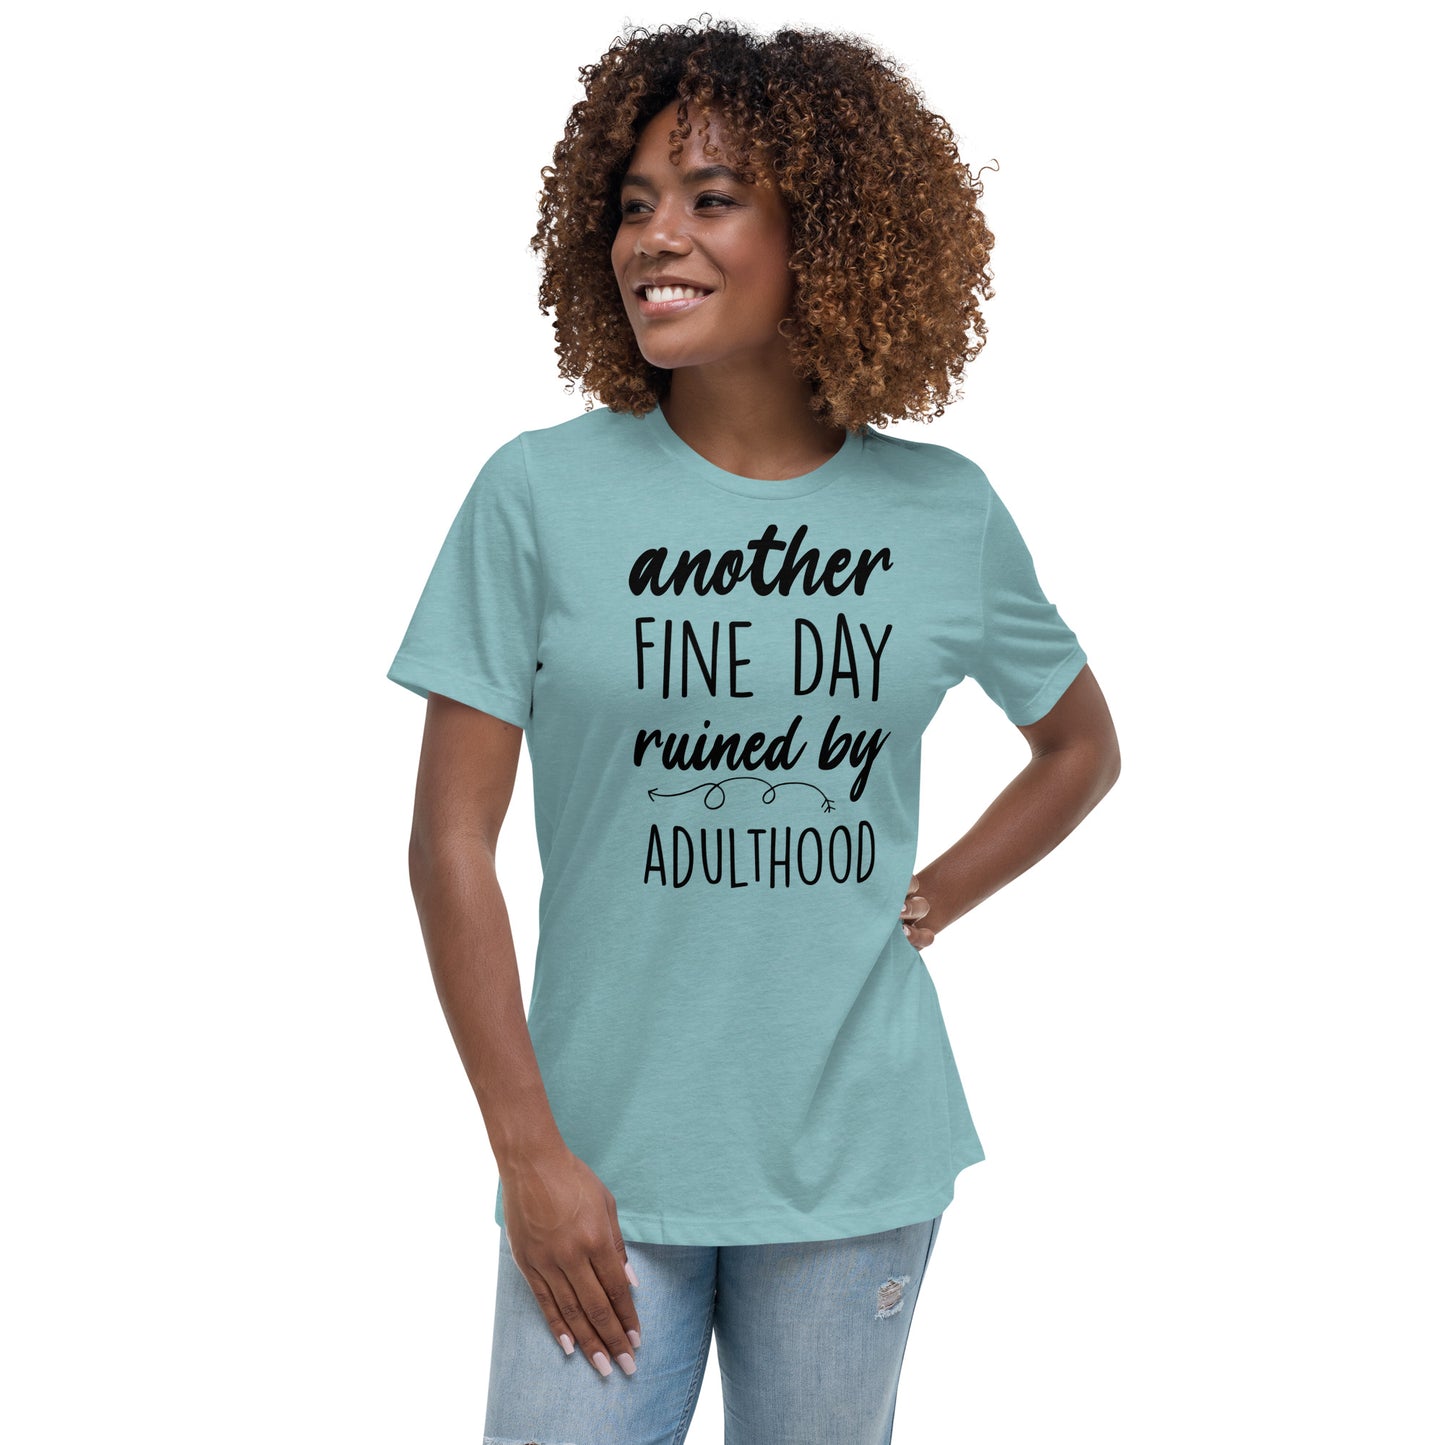 Another Fine Day Ruined by Adulthood Tshirt